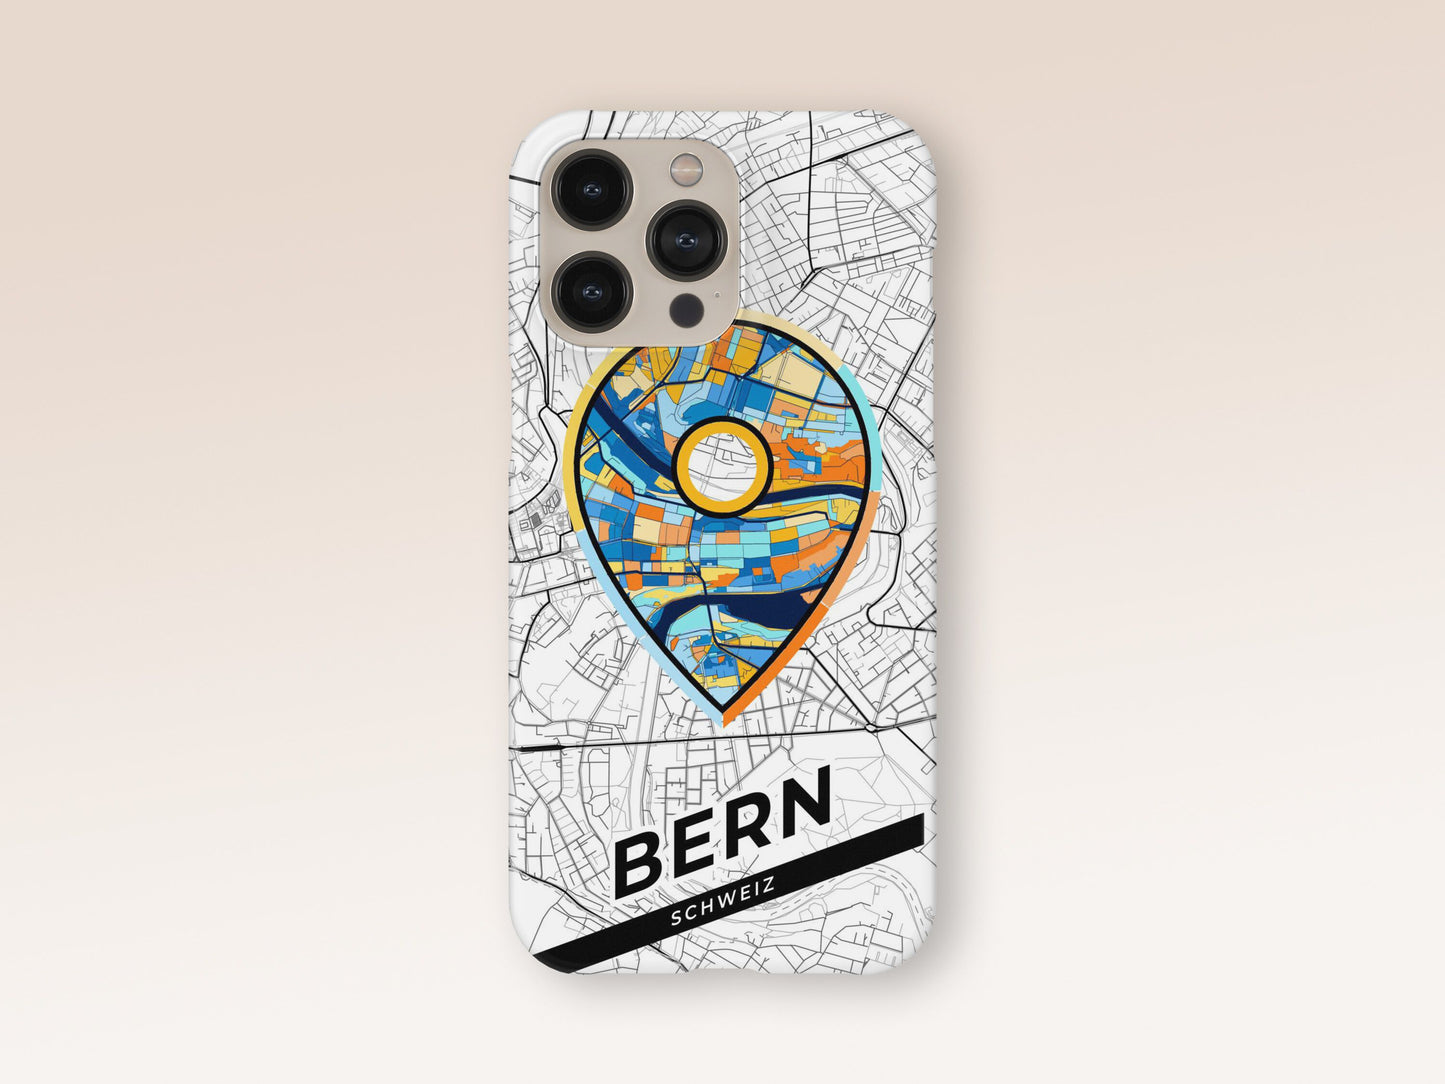 Bern Switzerland slim phone case with colorful icon. Birthday, wedding or housewarming gift. Couple match cases. 1